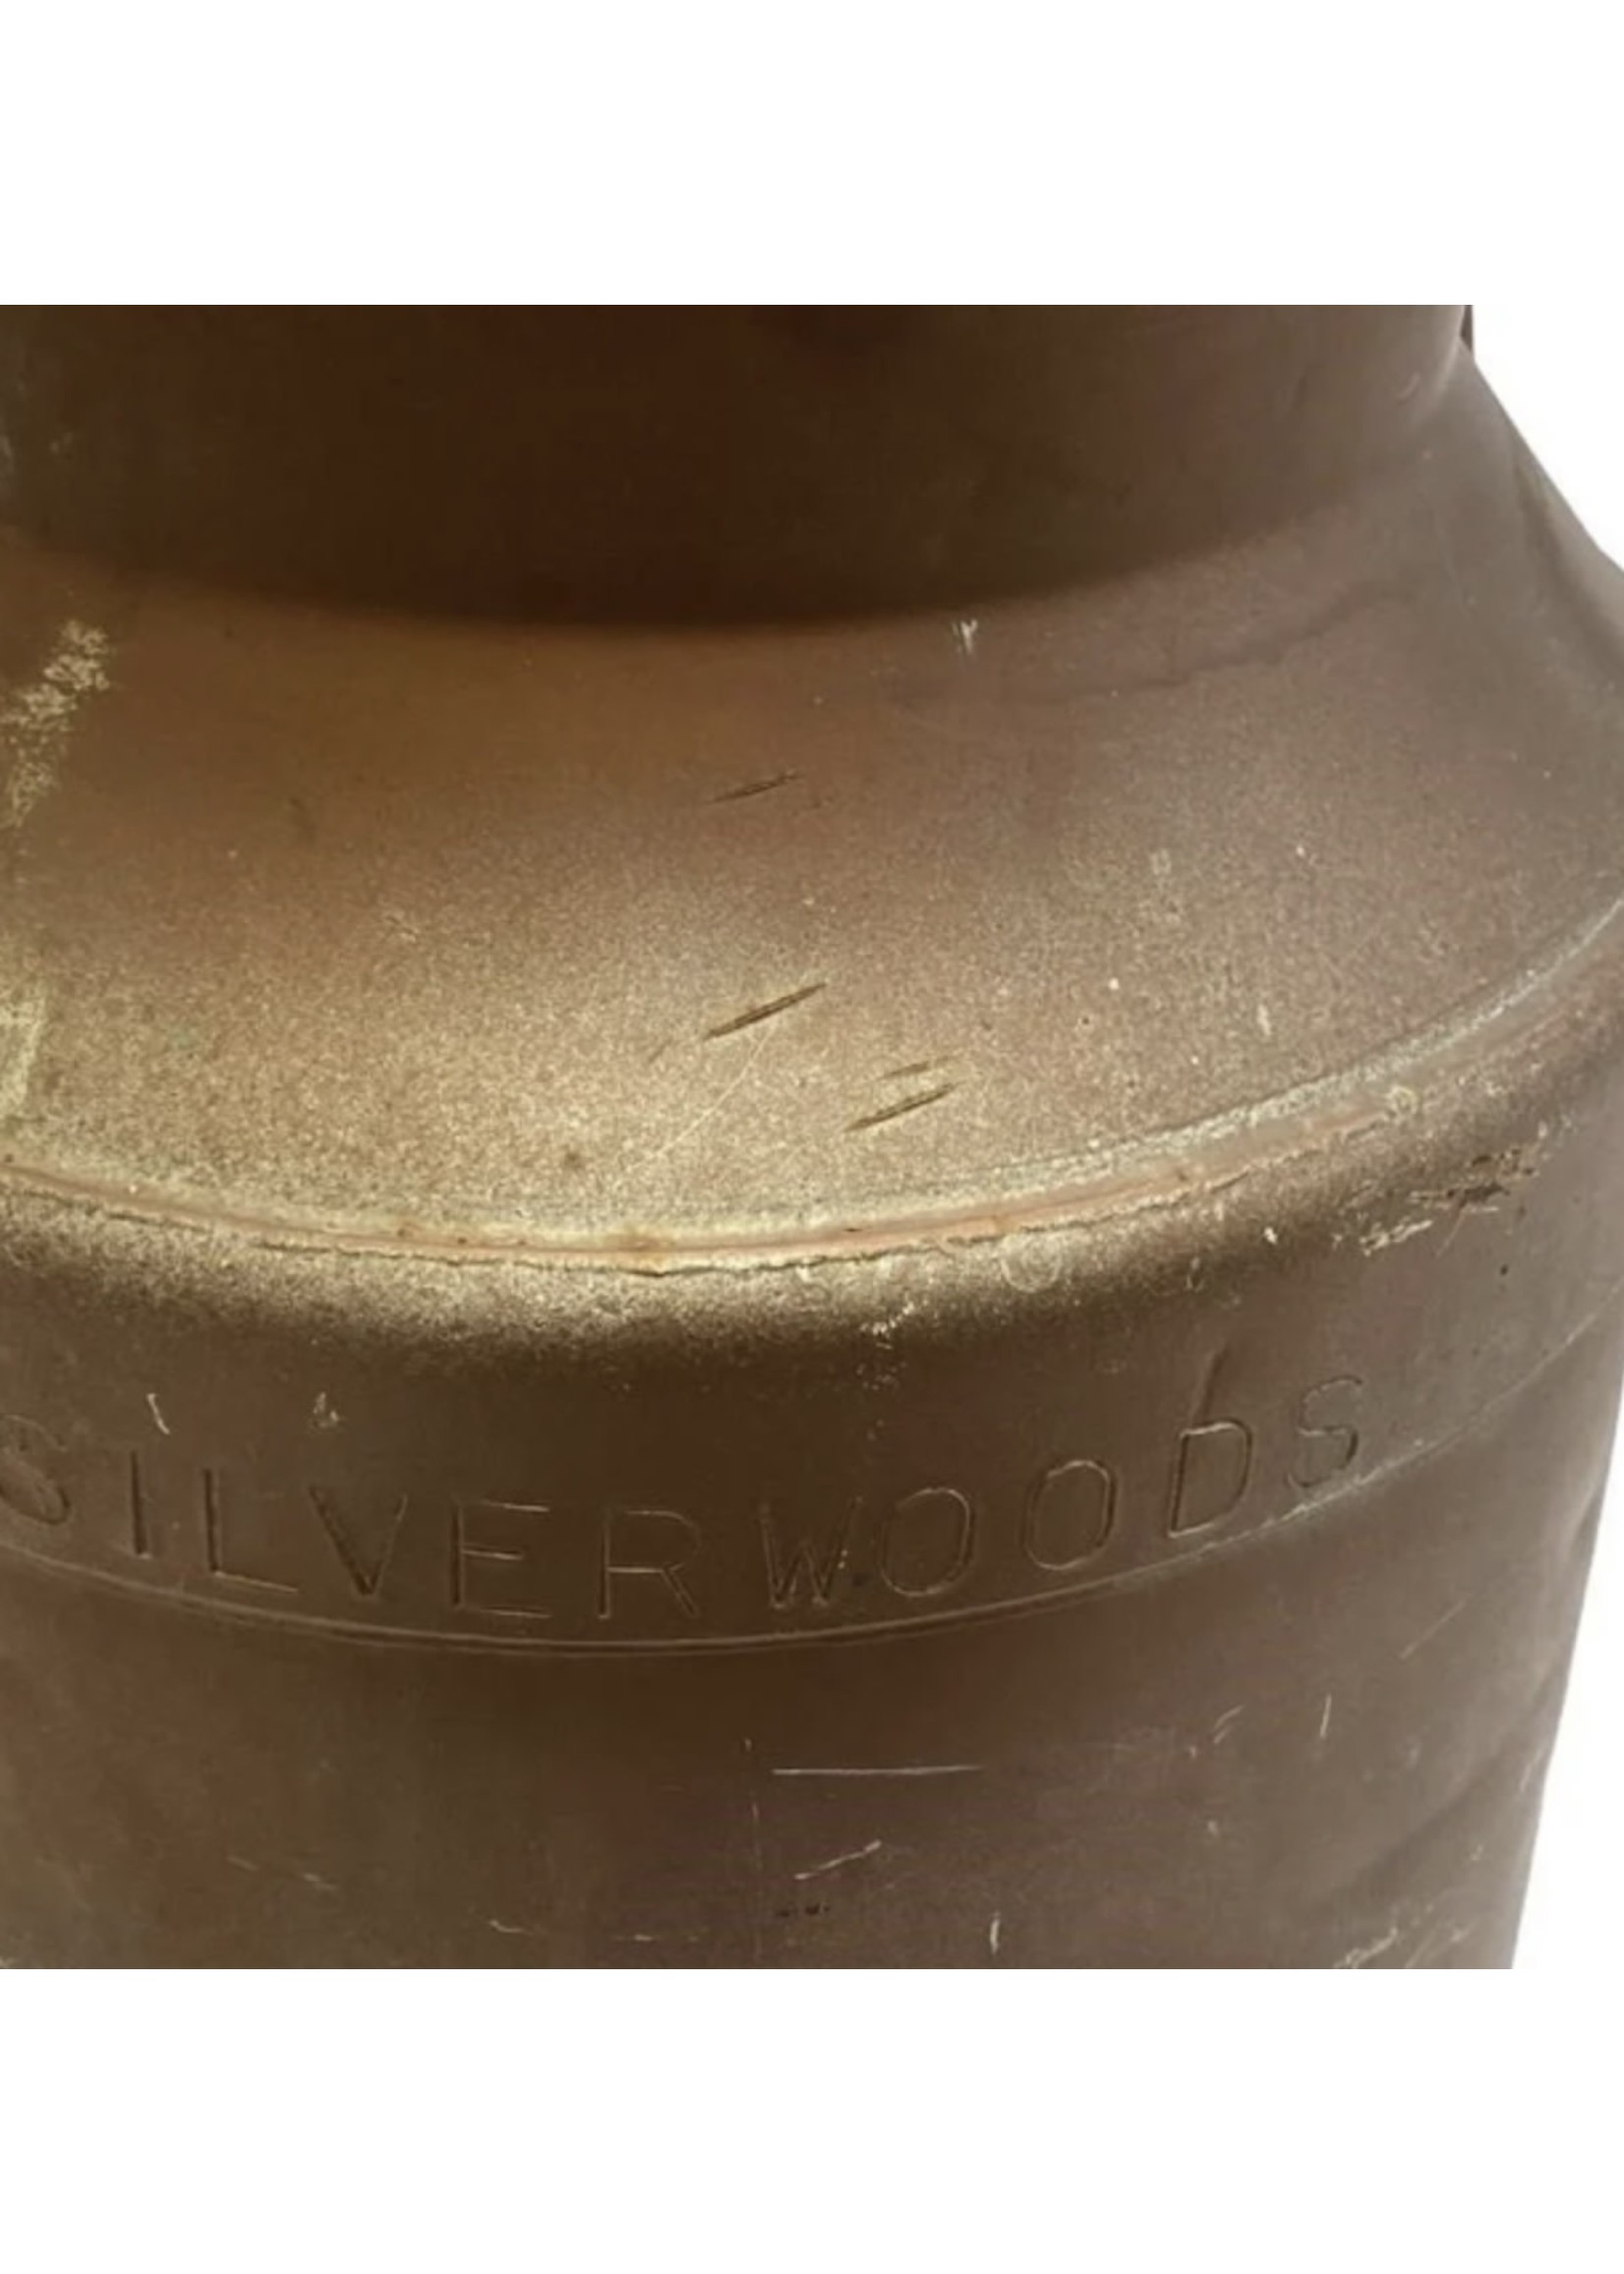 Silverwood's London Dairy Milk Can - PICK UP ONLY